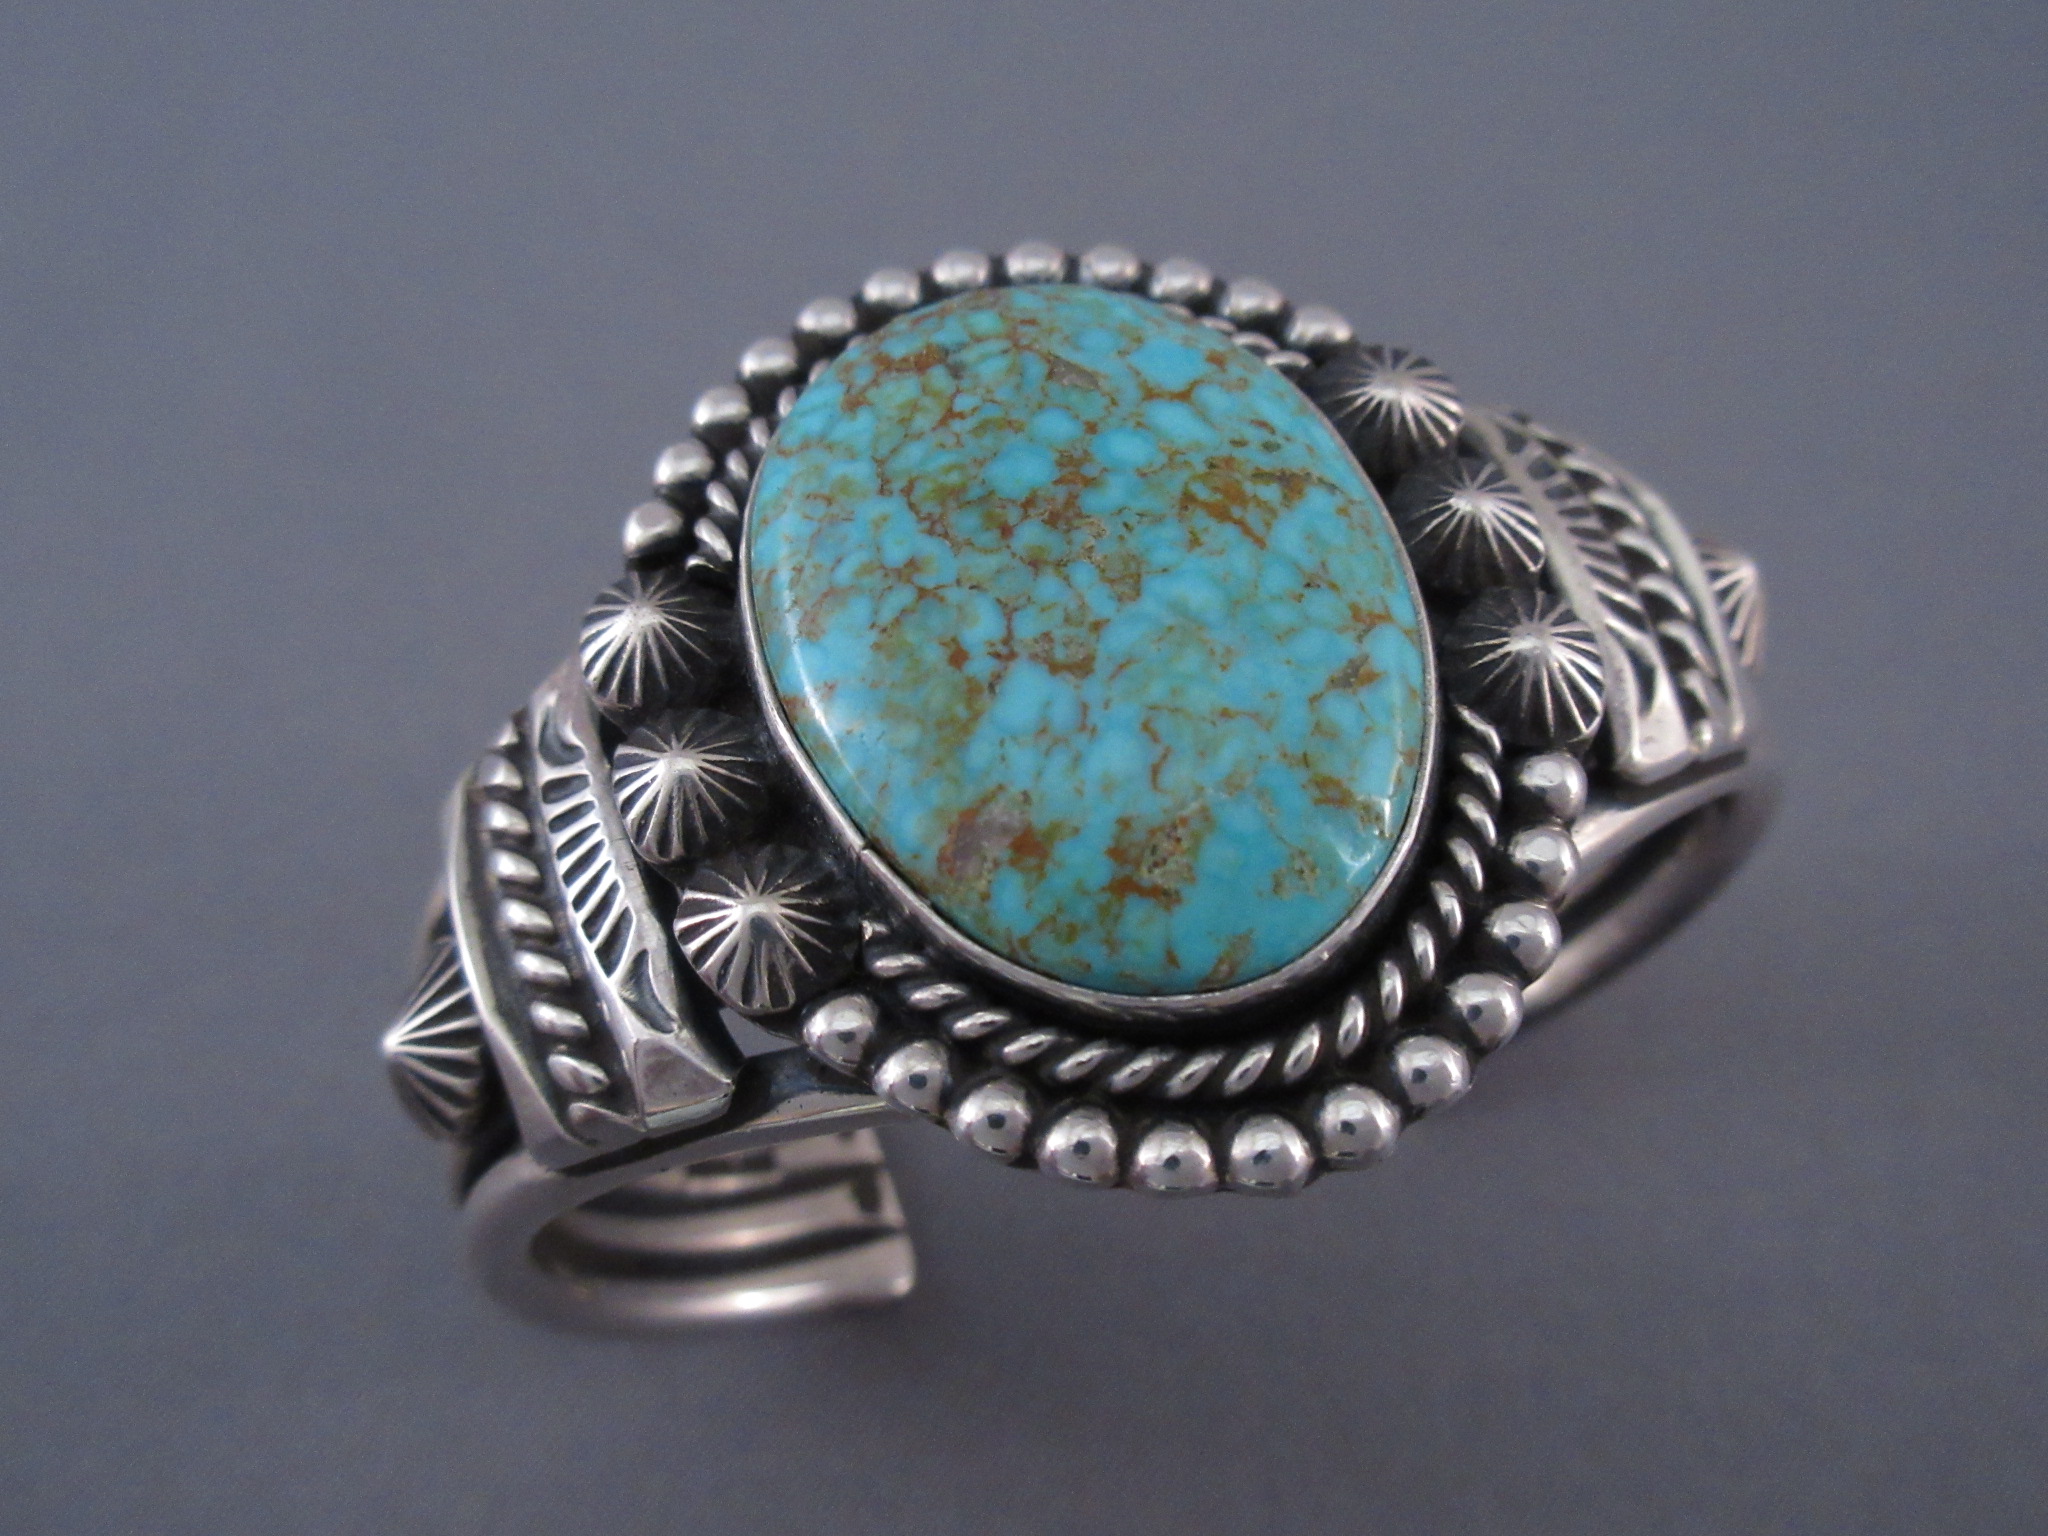 Turquoise Jewelry - Number Eight Turquoise Cuff Bracelet by Navajo jewelry artist, Jeanette Dale FOR SALE $745-